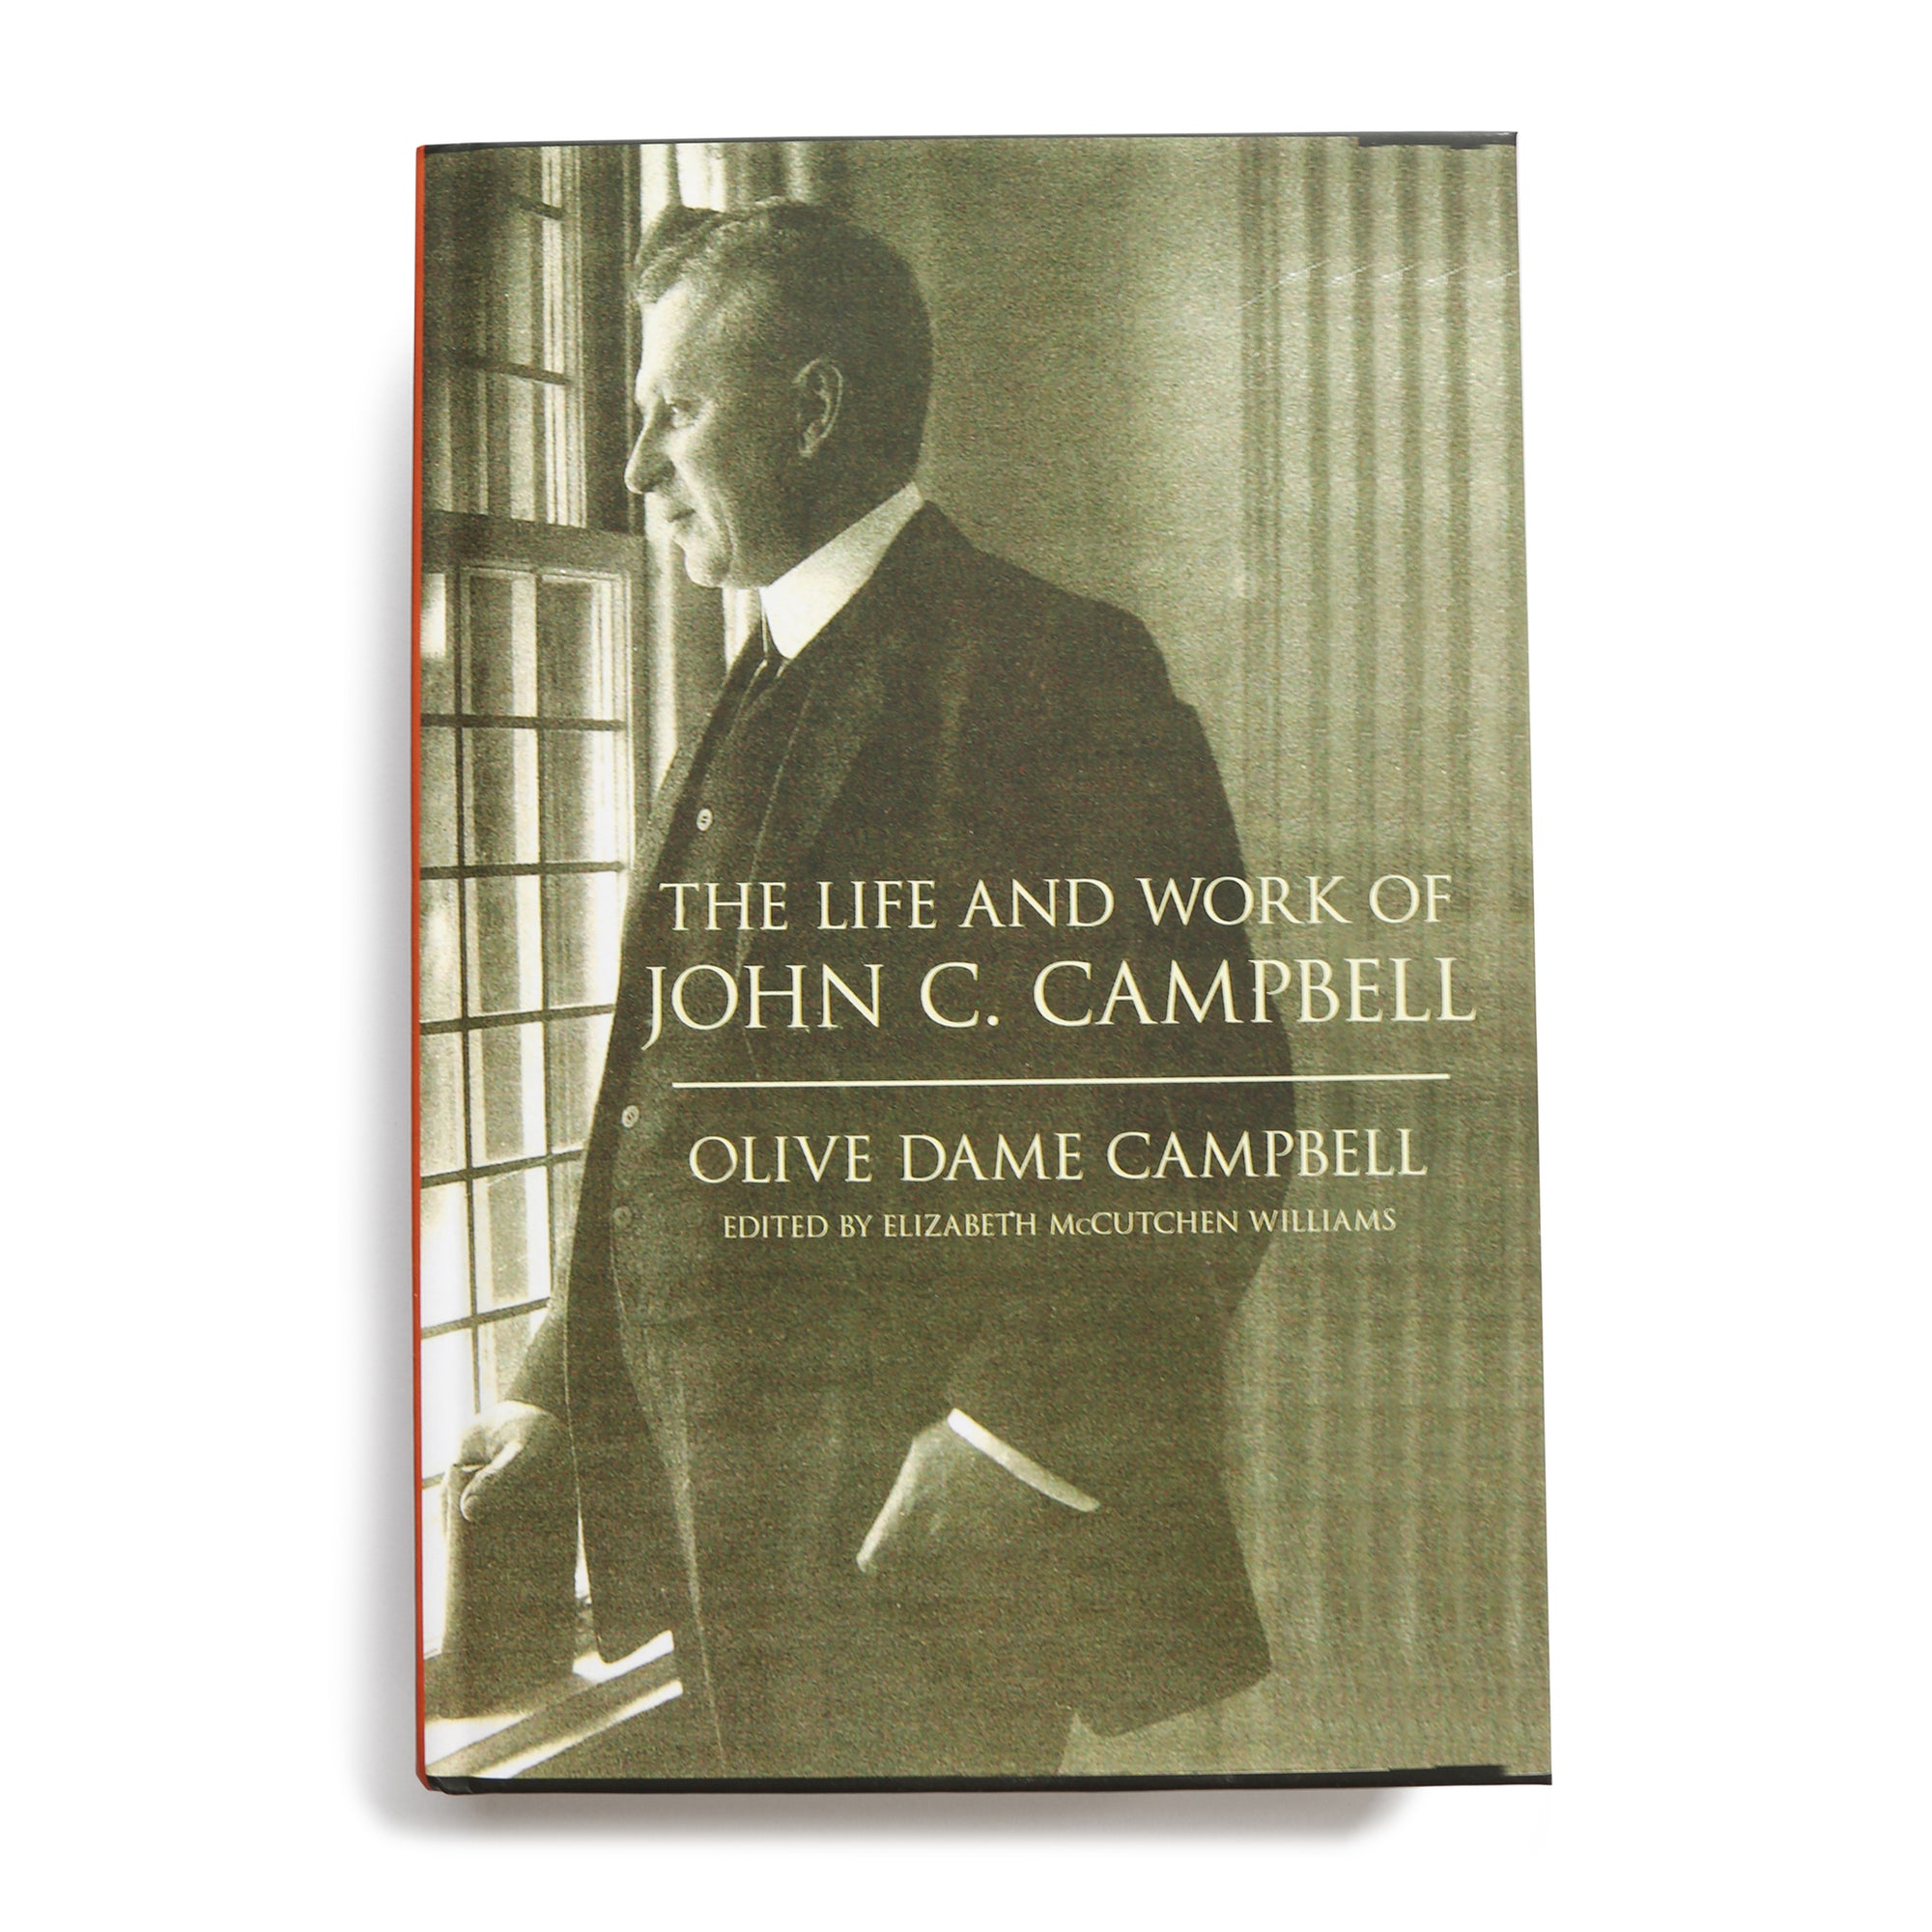 The Life & Work of John C. Campbell